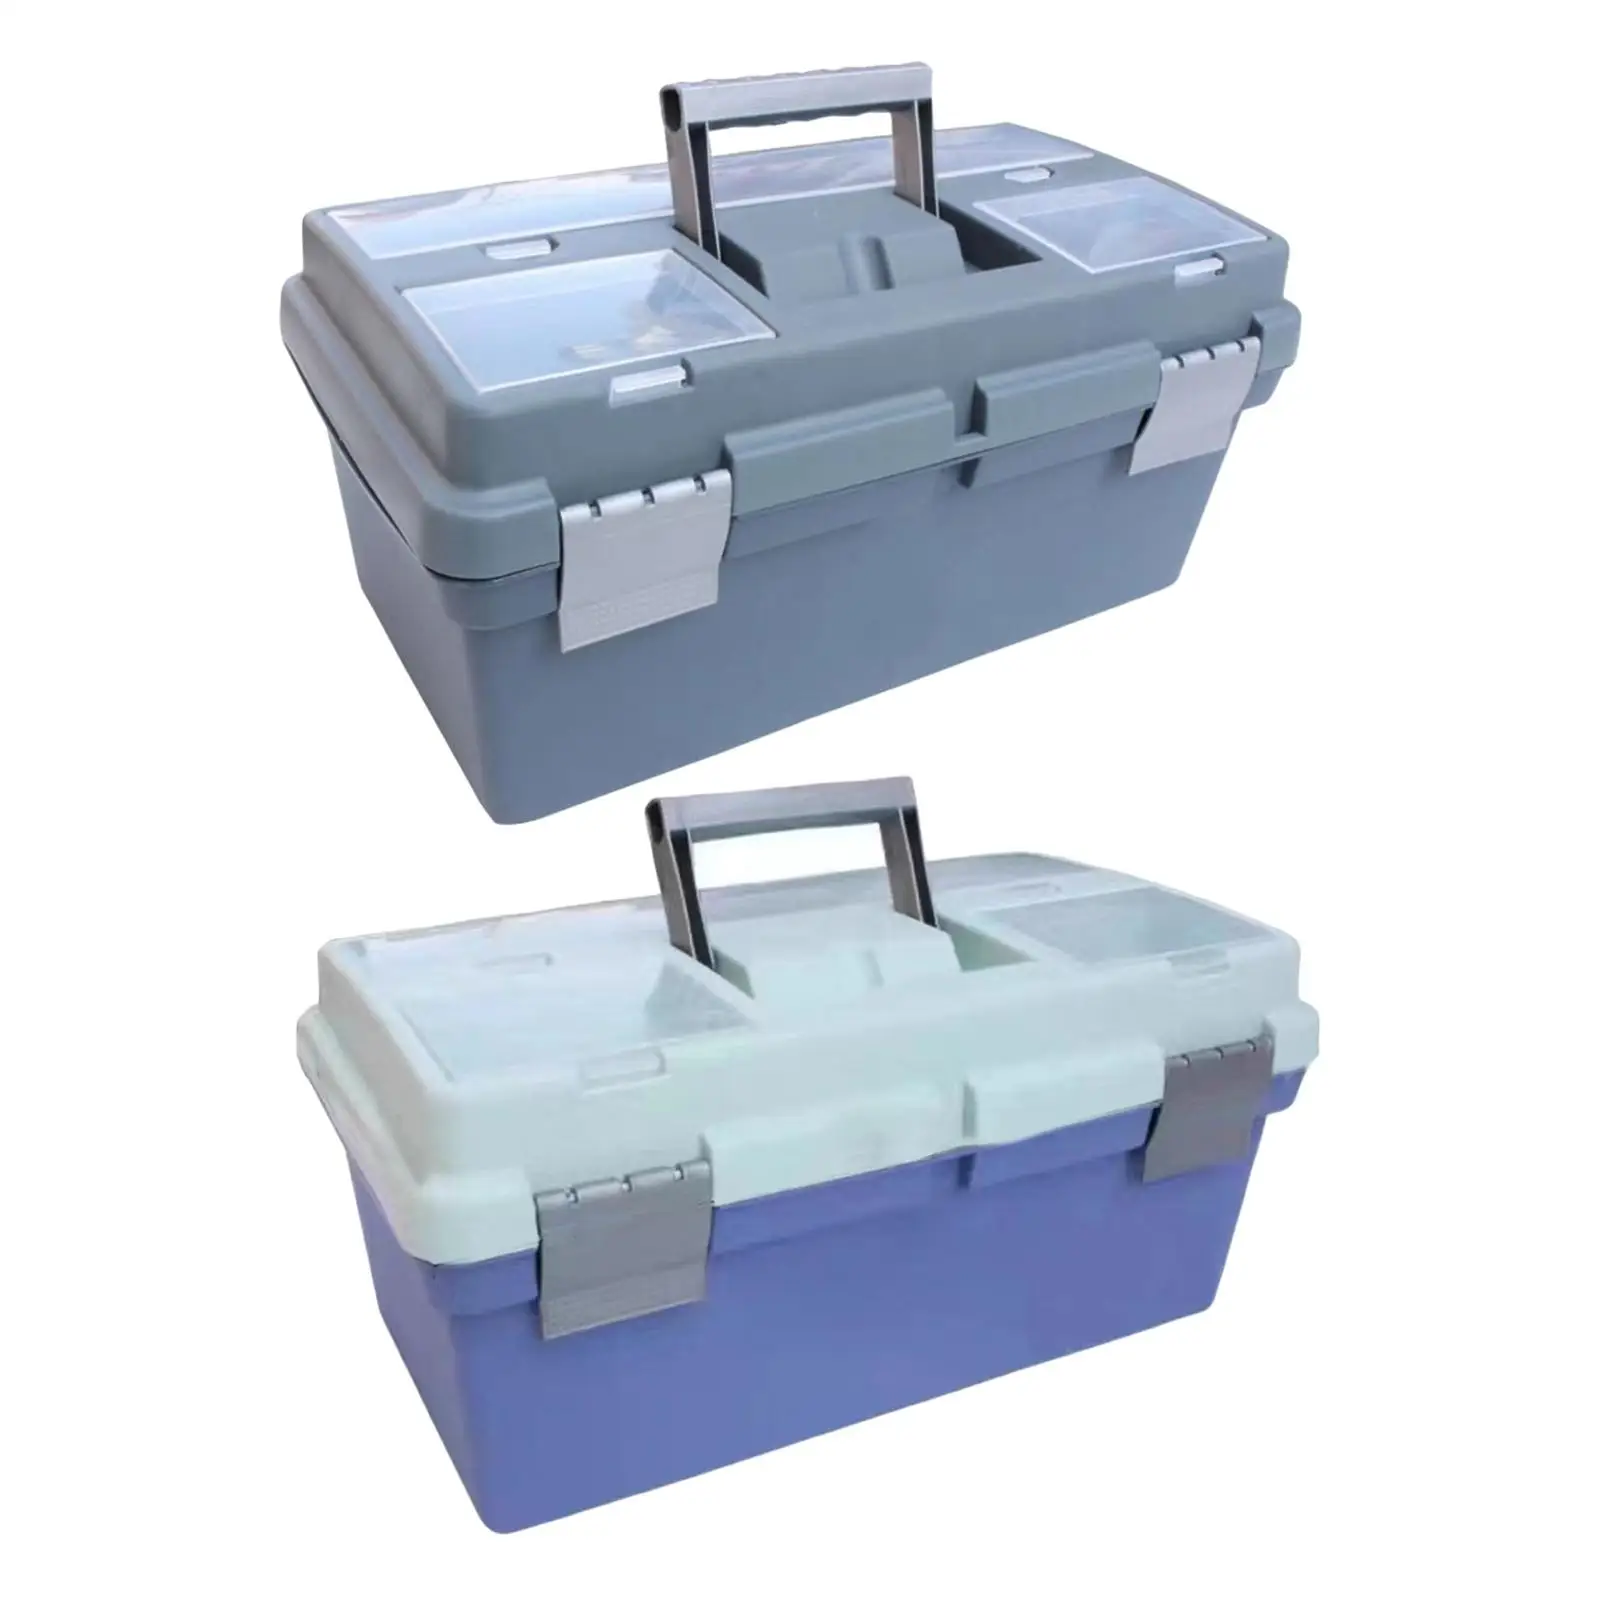 Multipurpose Storage Box Organizer Removable Tray Toolbox 2 Tray 16inch Portable Accessories Storage Box for Office car